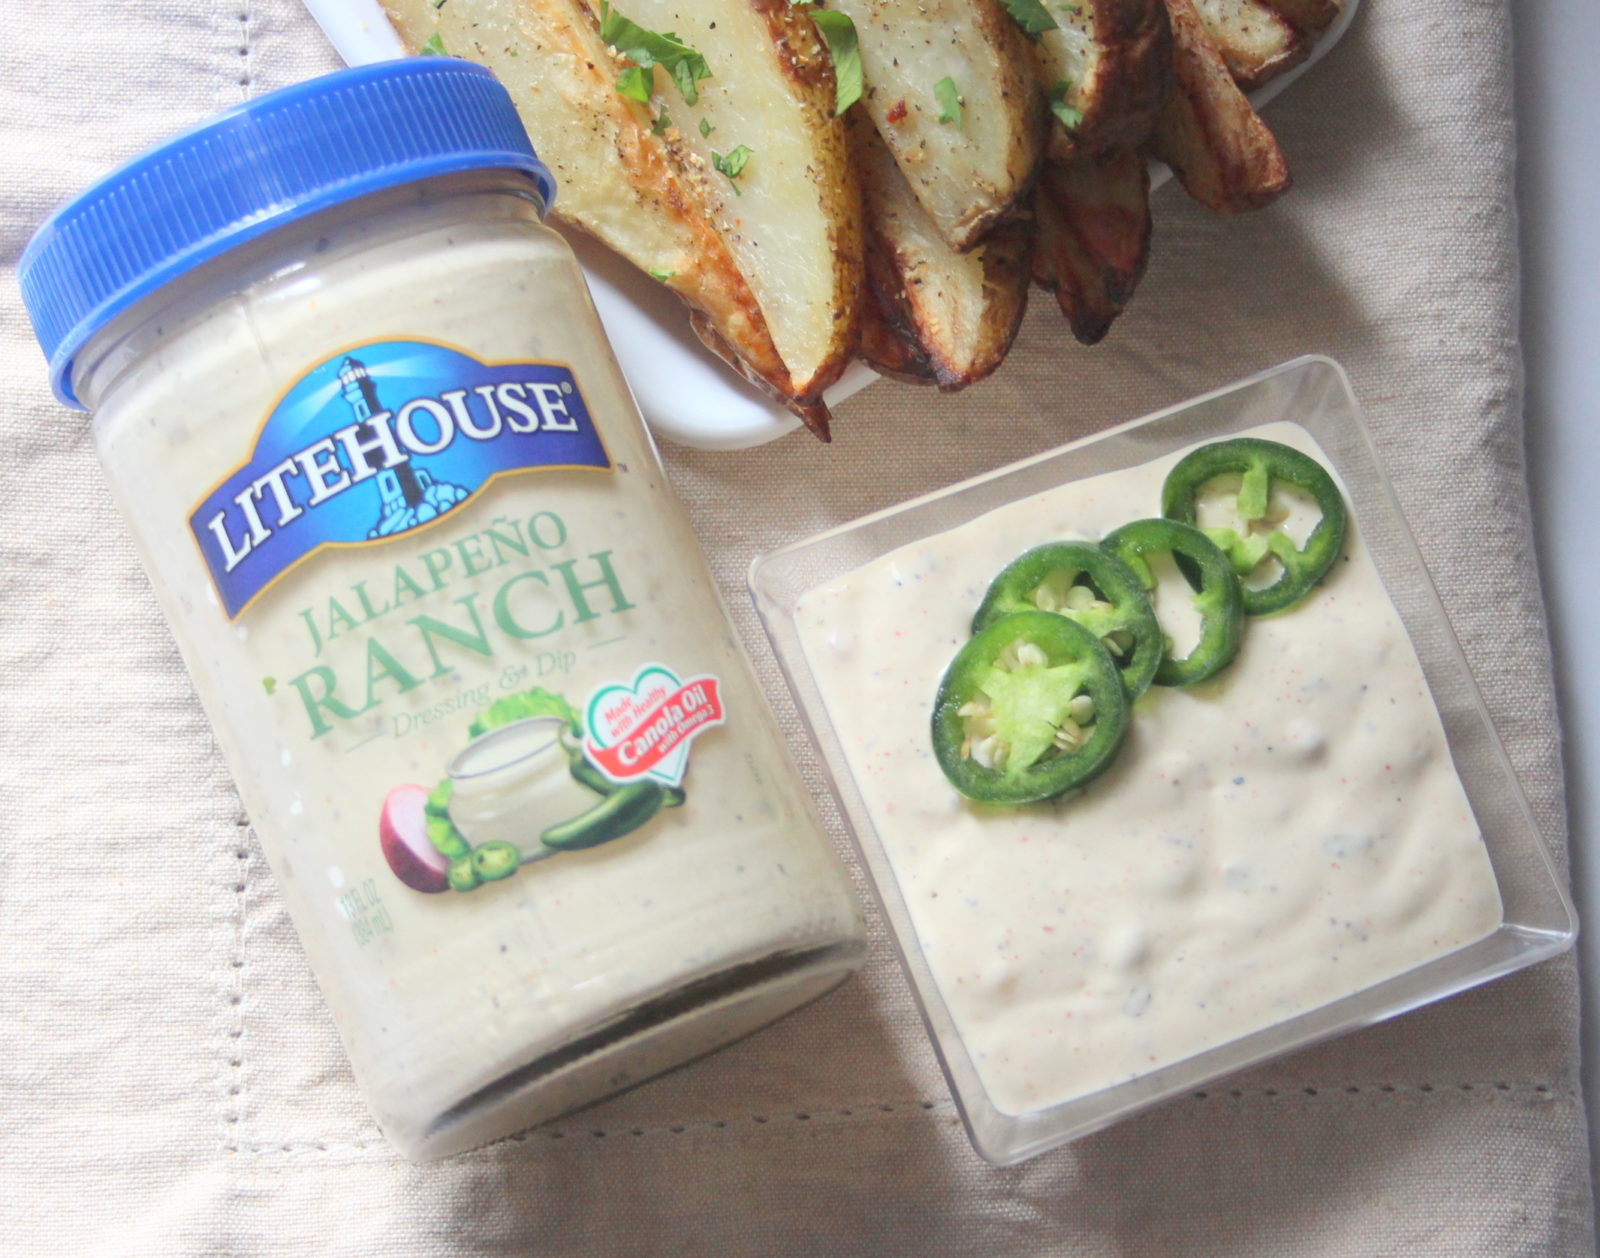 How to use Jalapeno Ranch Litehouse Dressing